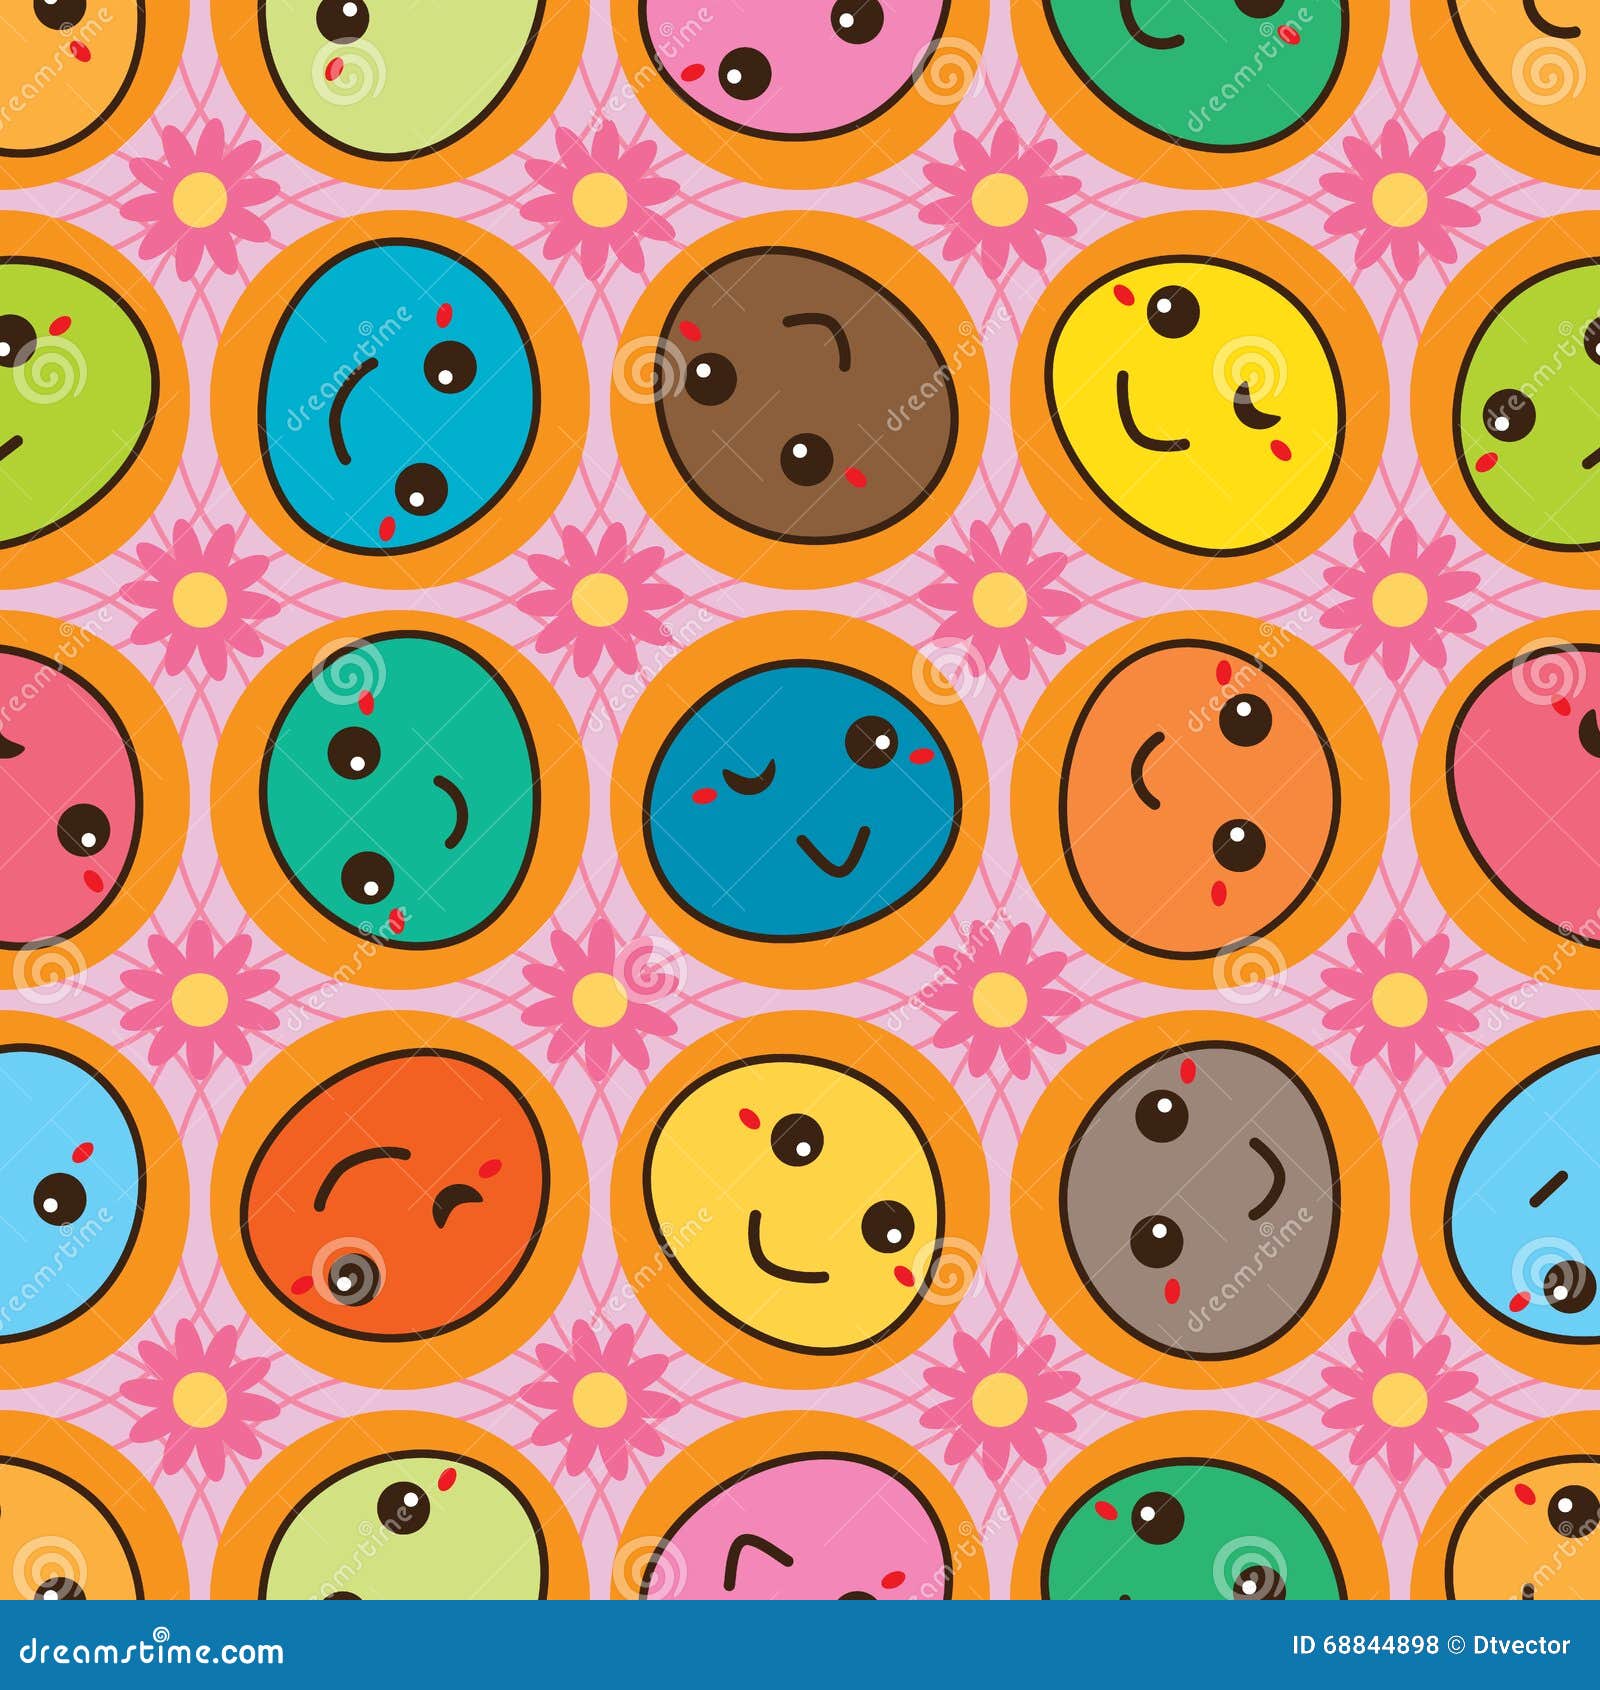 face cute look rotate seamless pattern